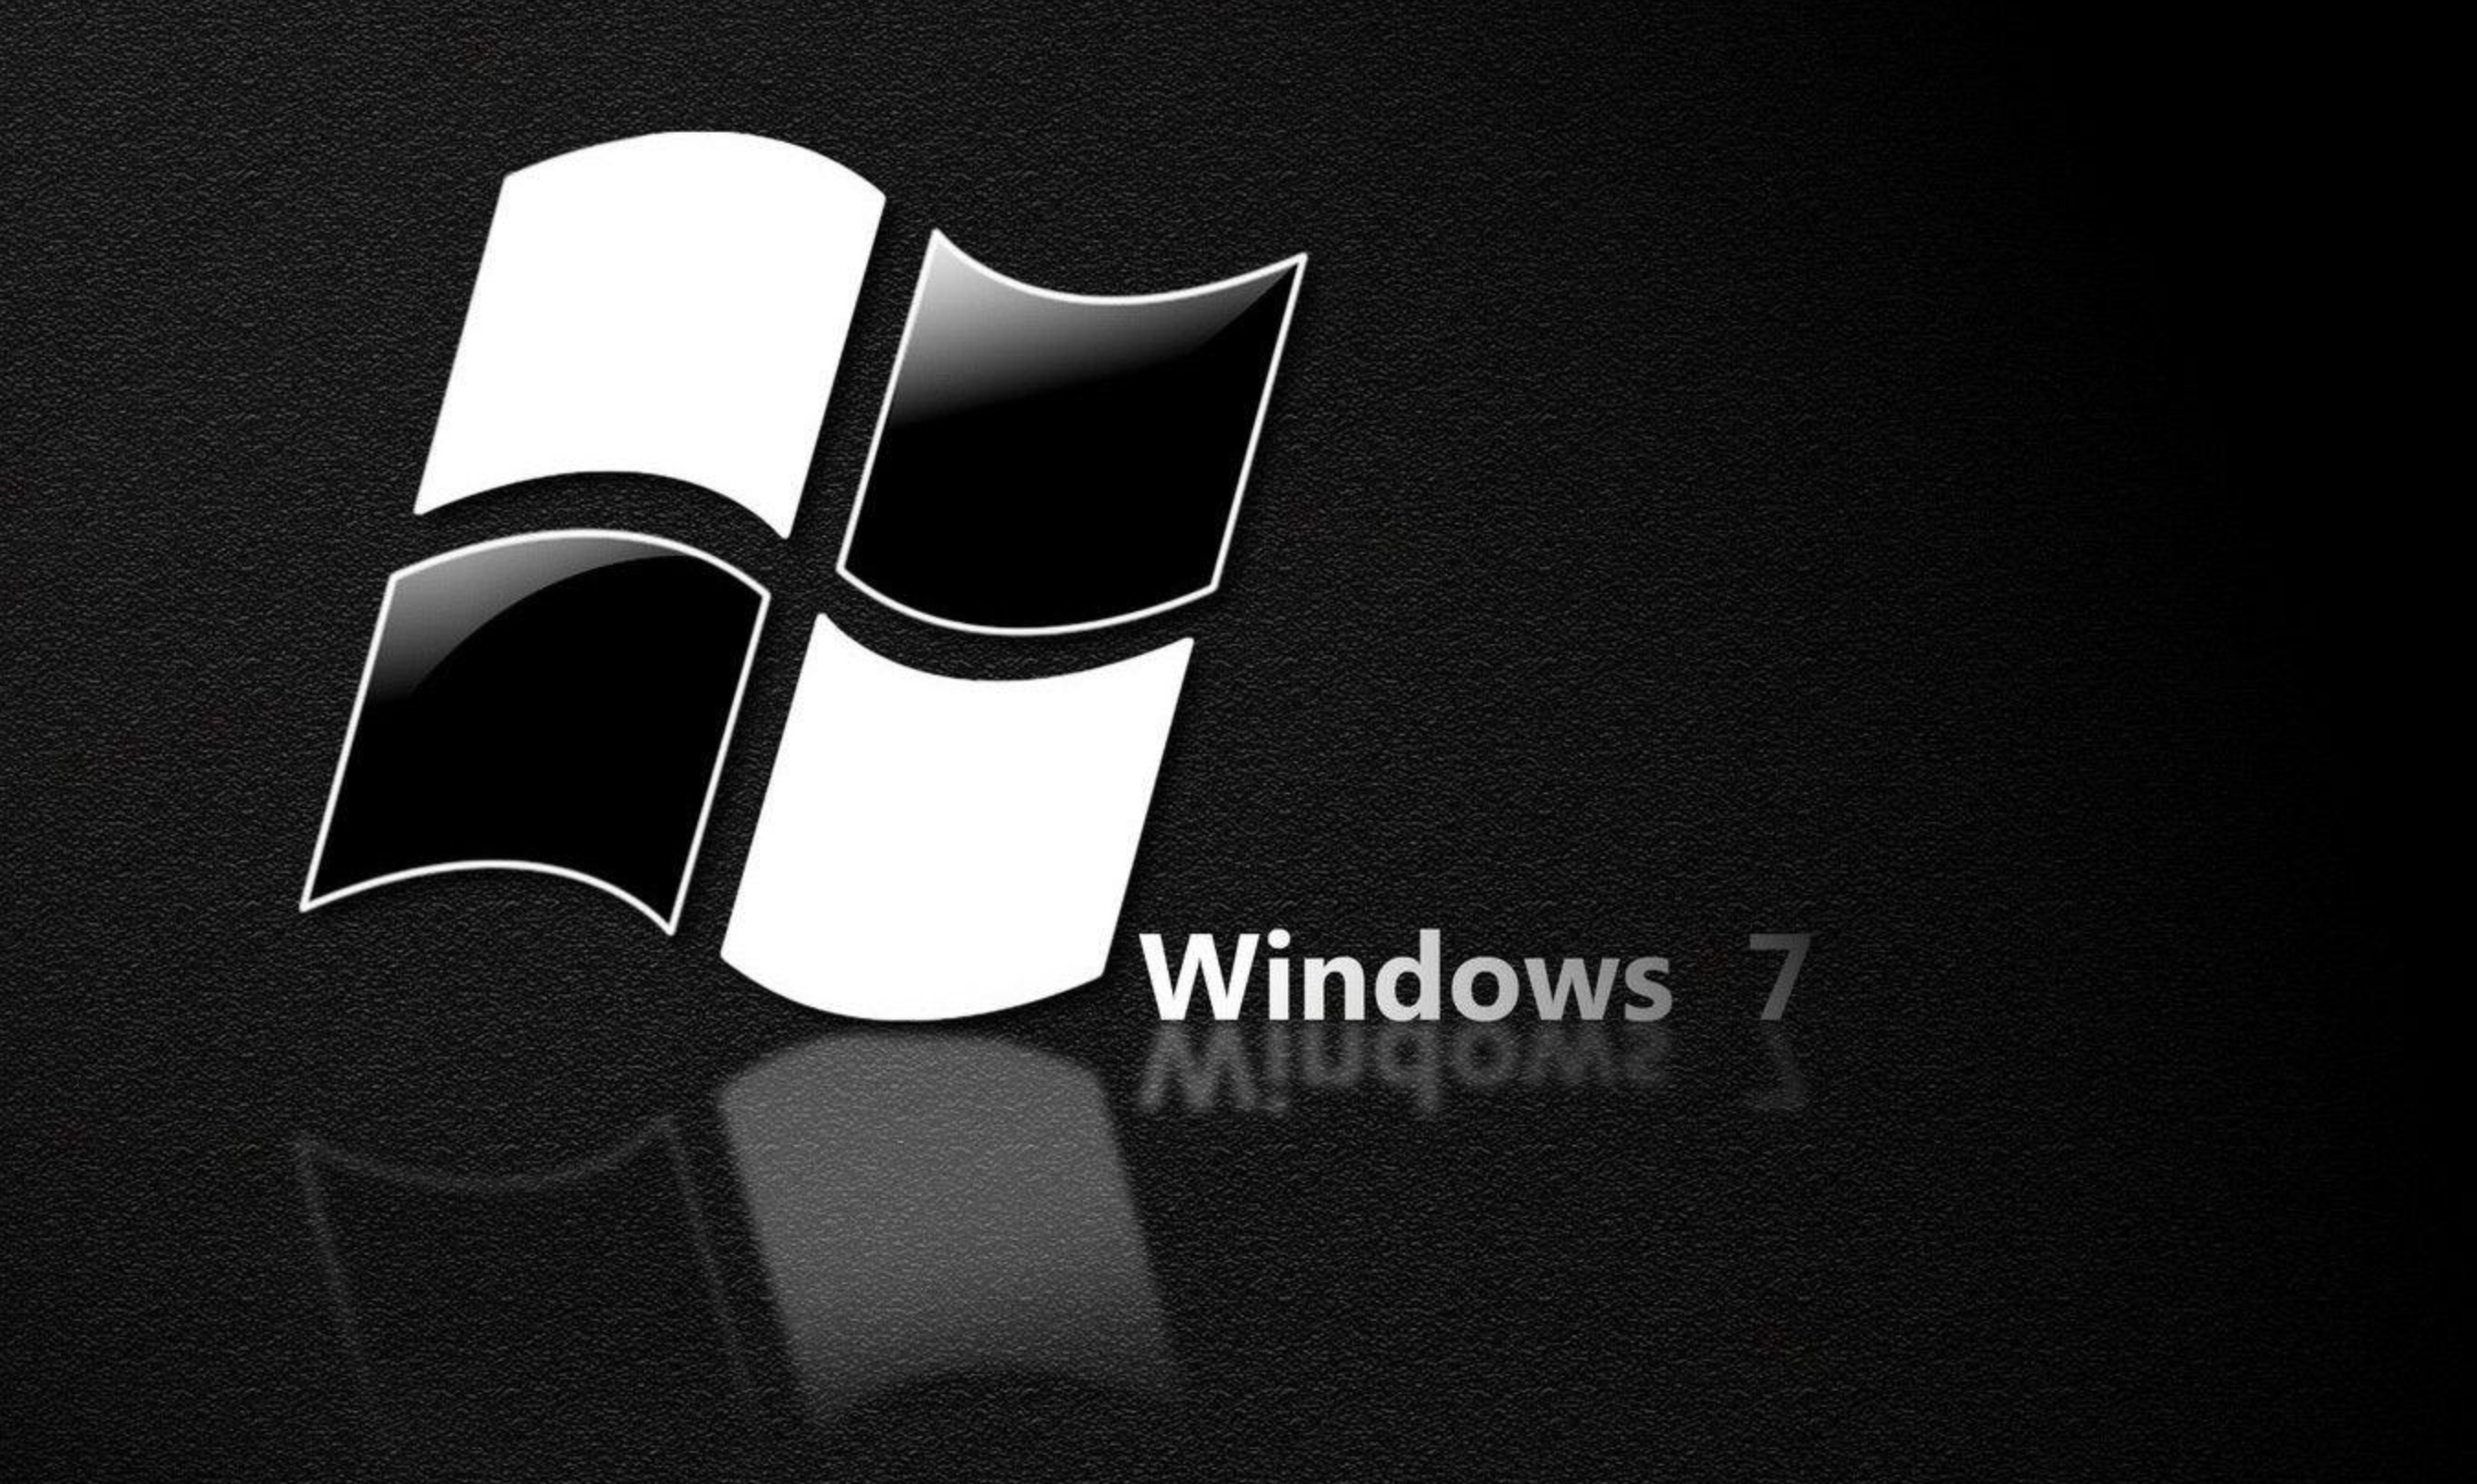 Black wallpaper: Users may experience a persistent black wallpaper on their Windows 7 desktop.
Windows 7 operating system: This issue specifically affects users running the Windows 7 operating system.